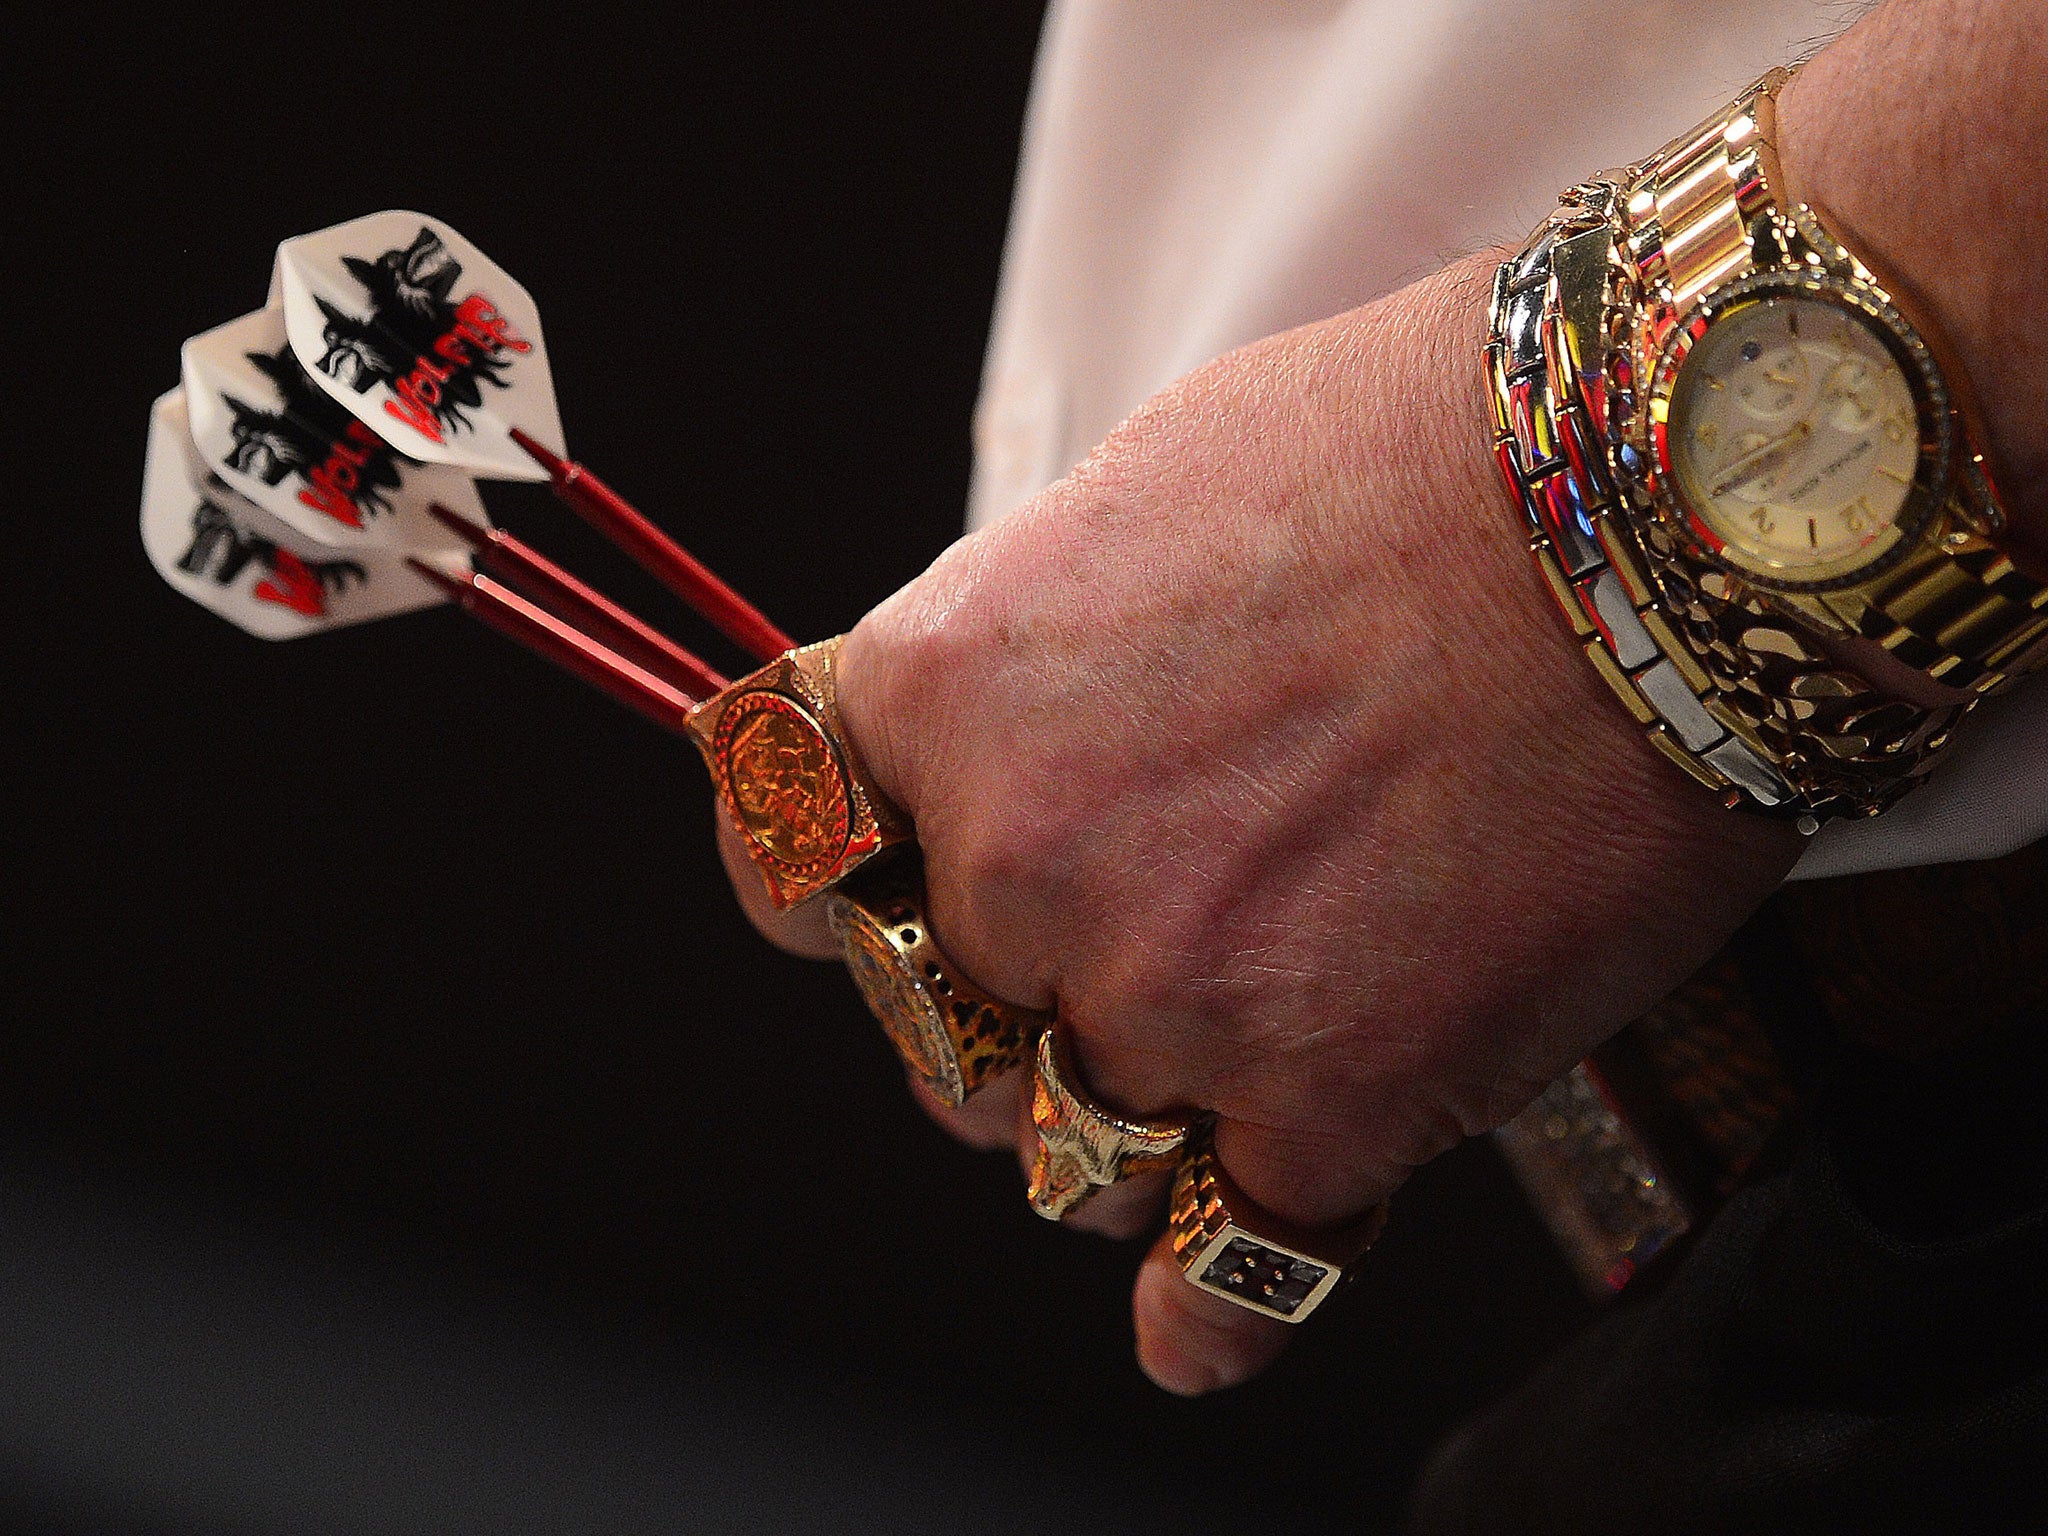 Darts players used to be on the heavy side, but now they're doing it the 'dutch' way